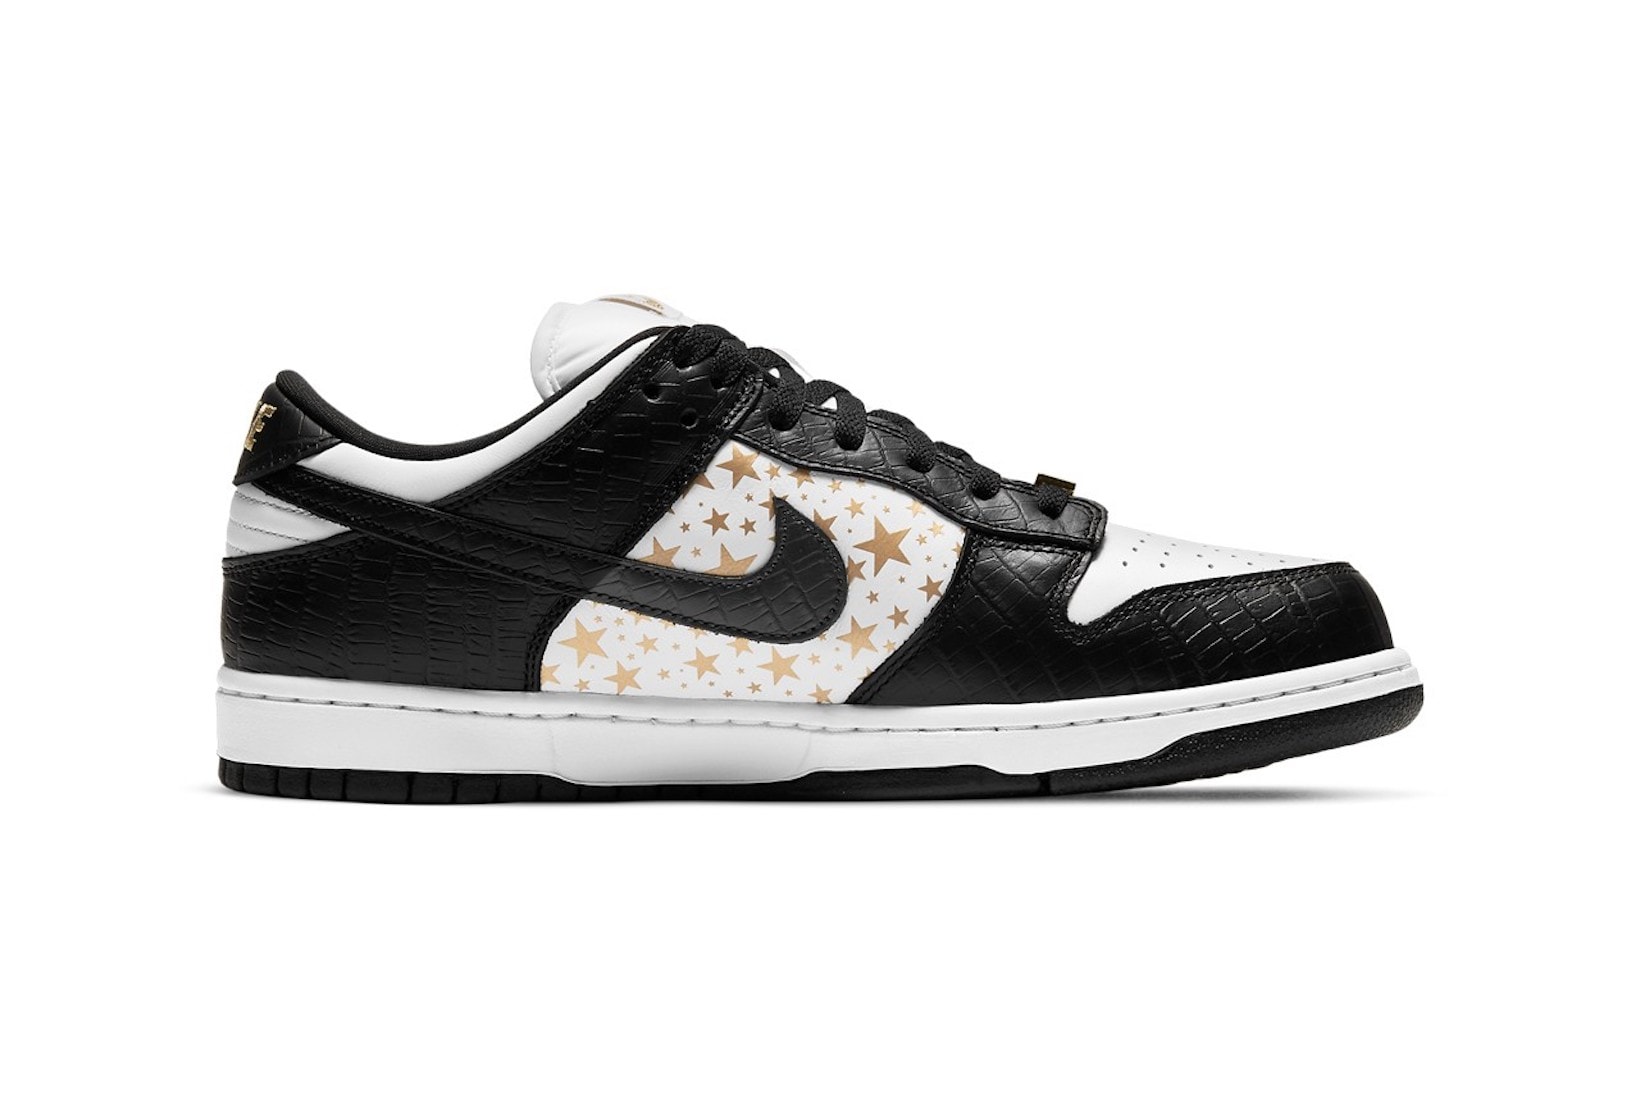 supreme nike sb dunk low collaboration sneakers black white colorway lateral gold stars laces